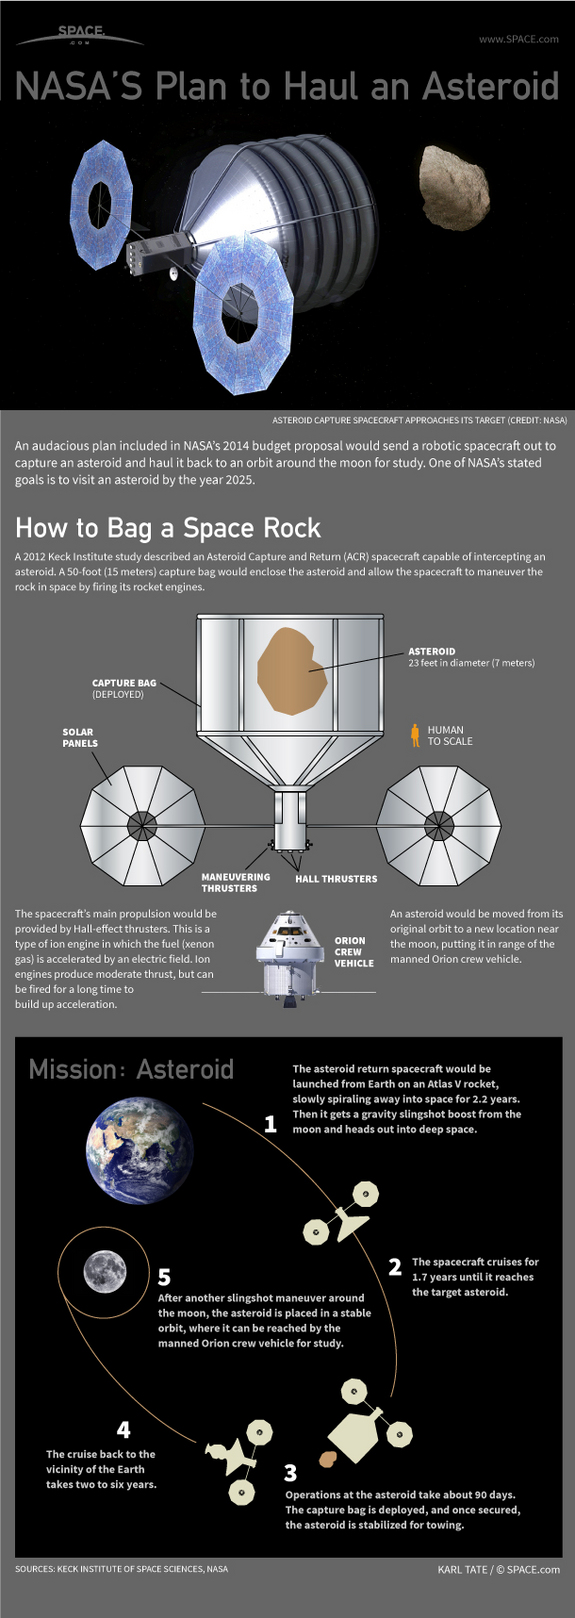 Find out how NASA's plan to move an asteroid works in this SPACE.com infographic.